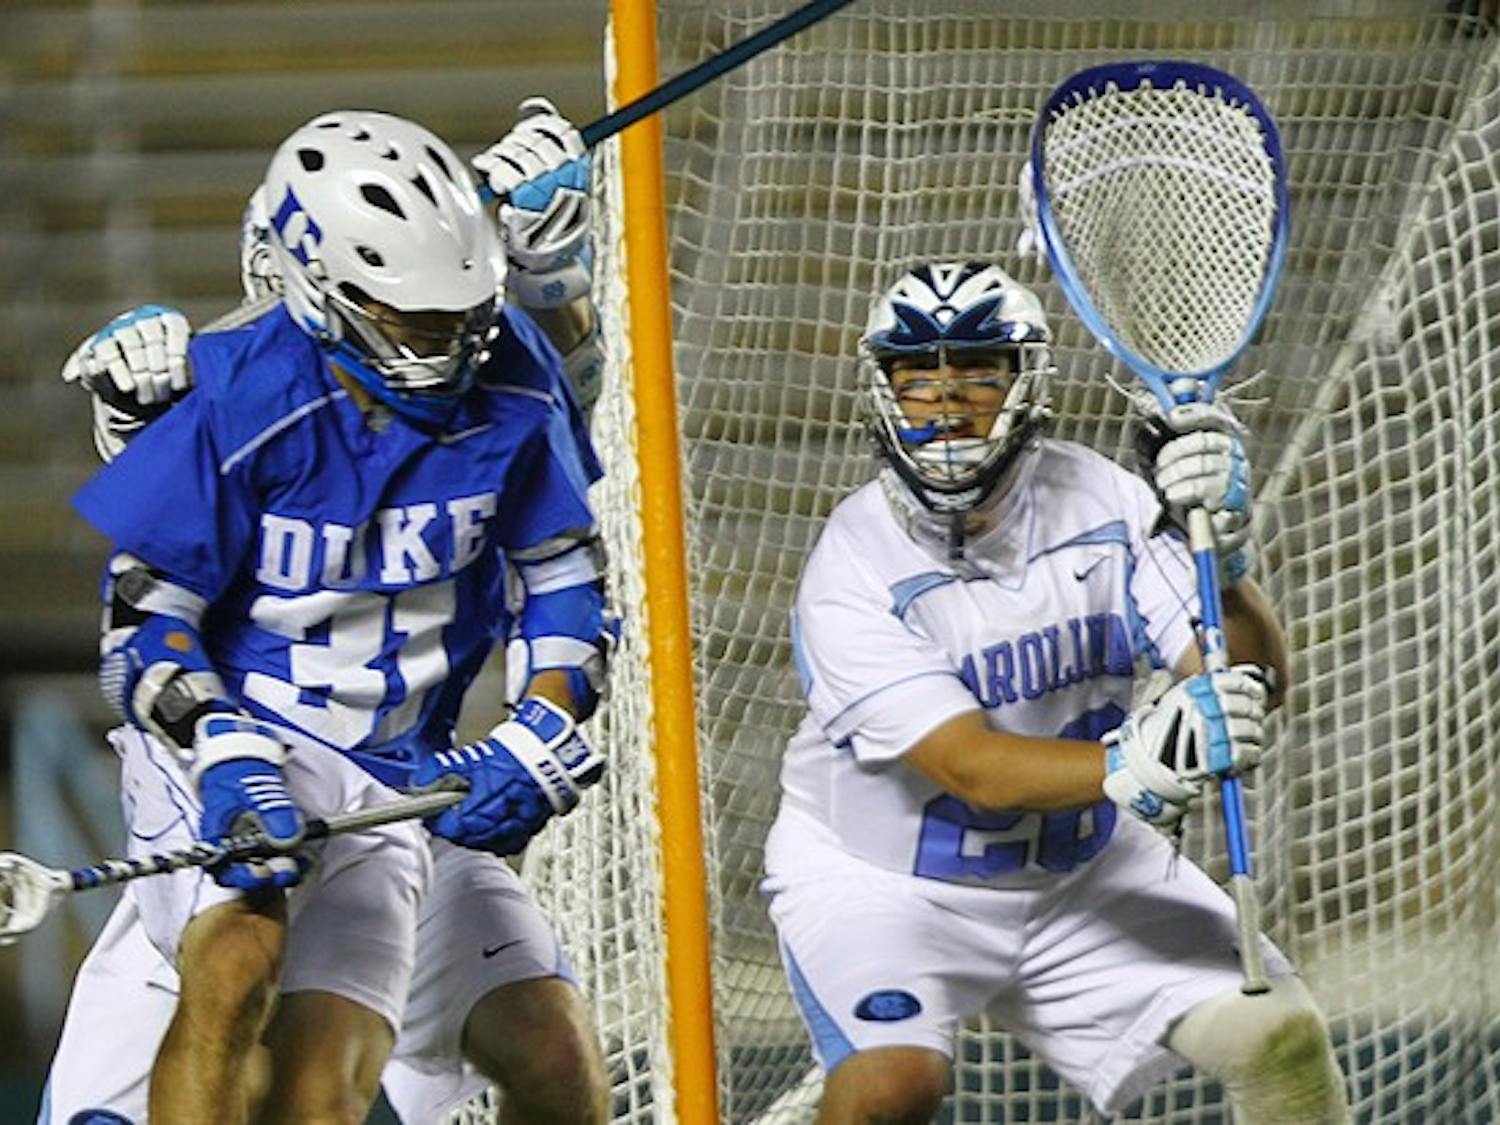 Both offenses were on display Friday night in Chapel Hill, but after coming back from nine goals down Duke fell to North Carolina.